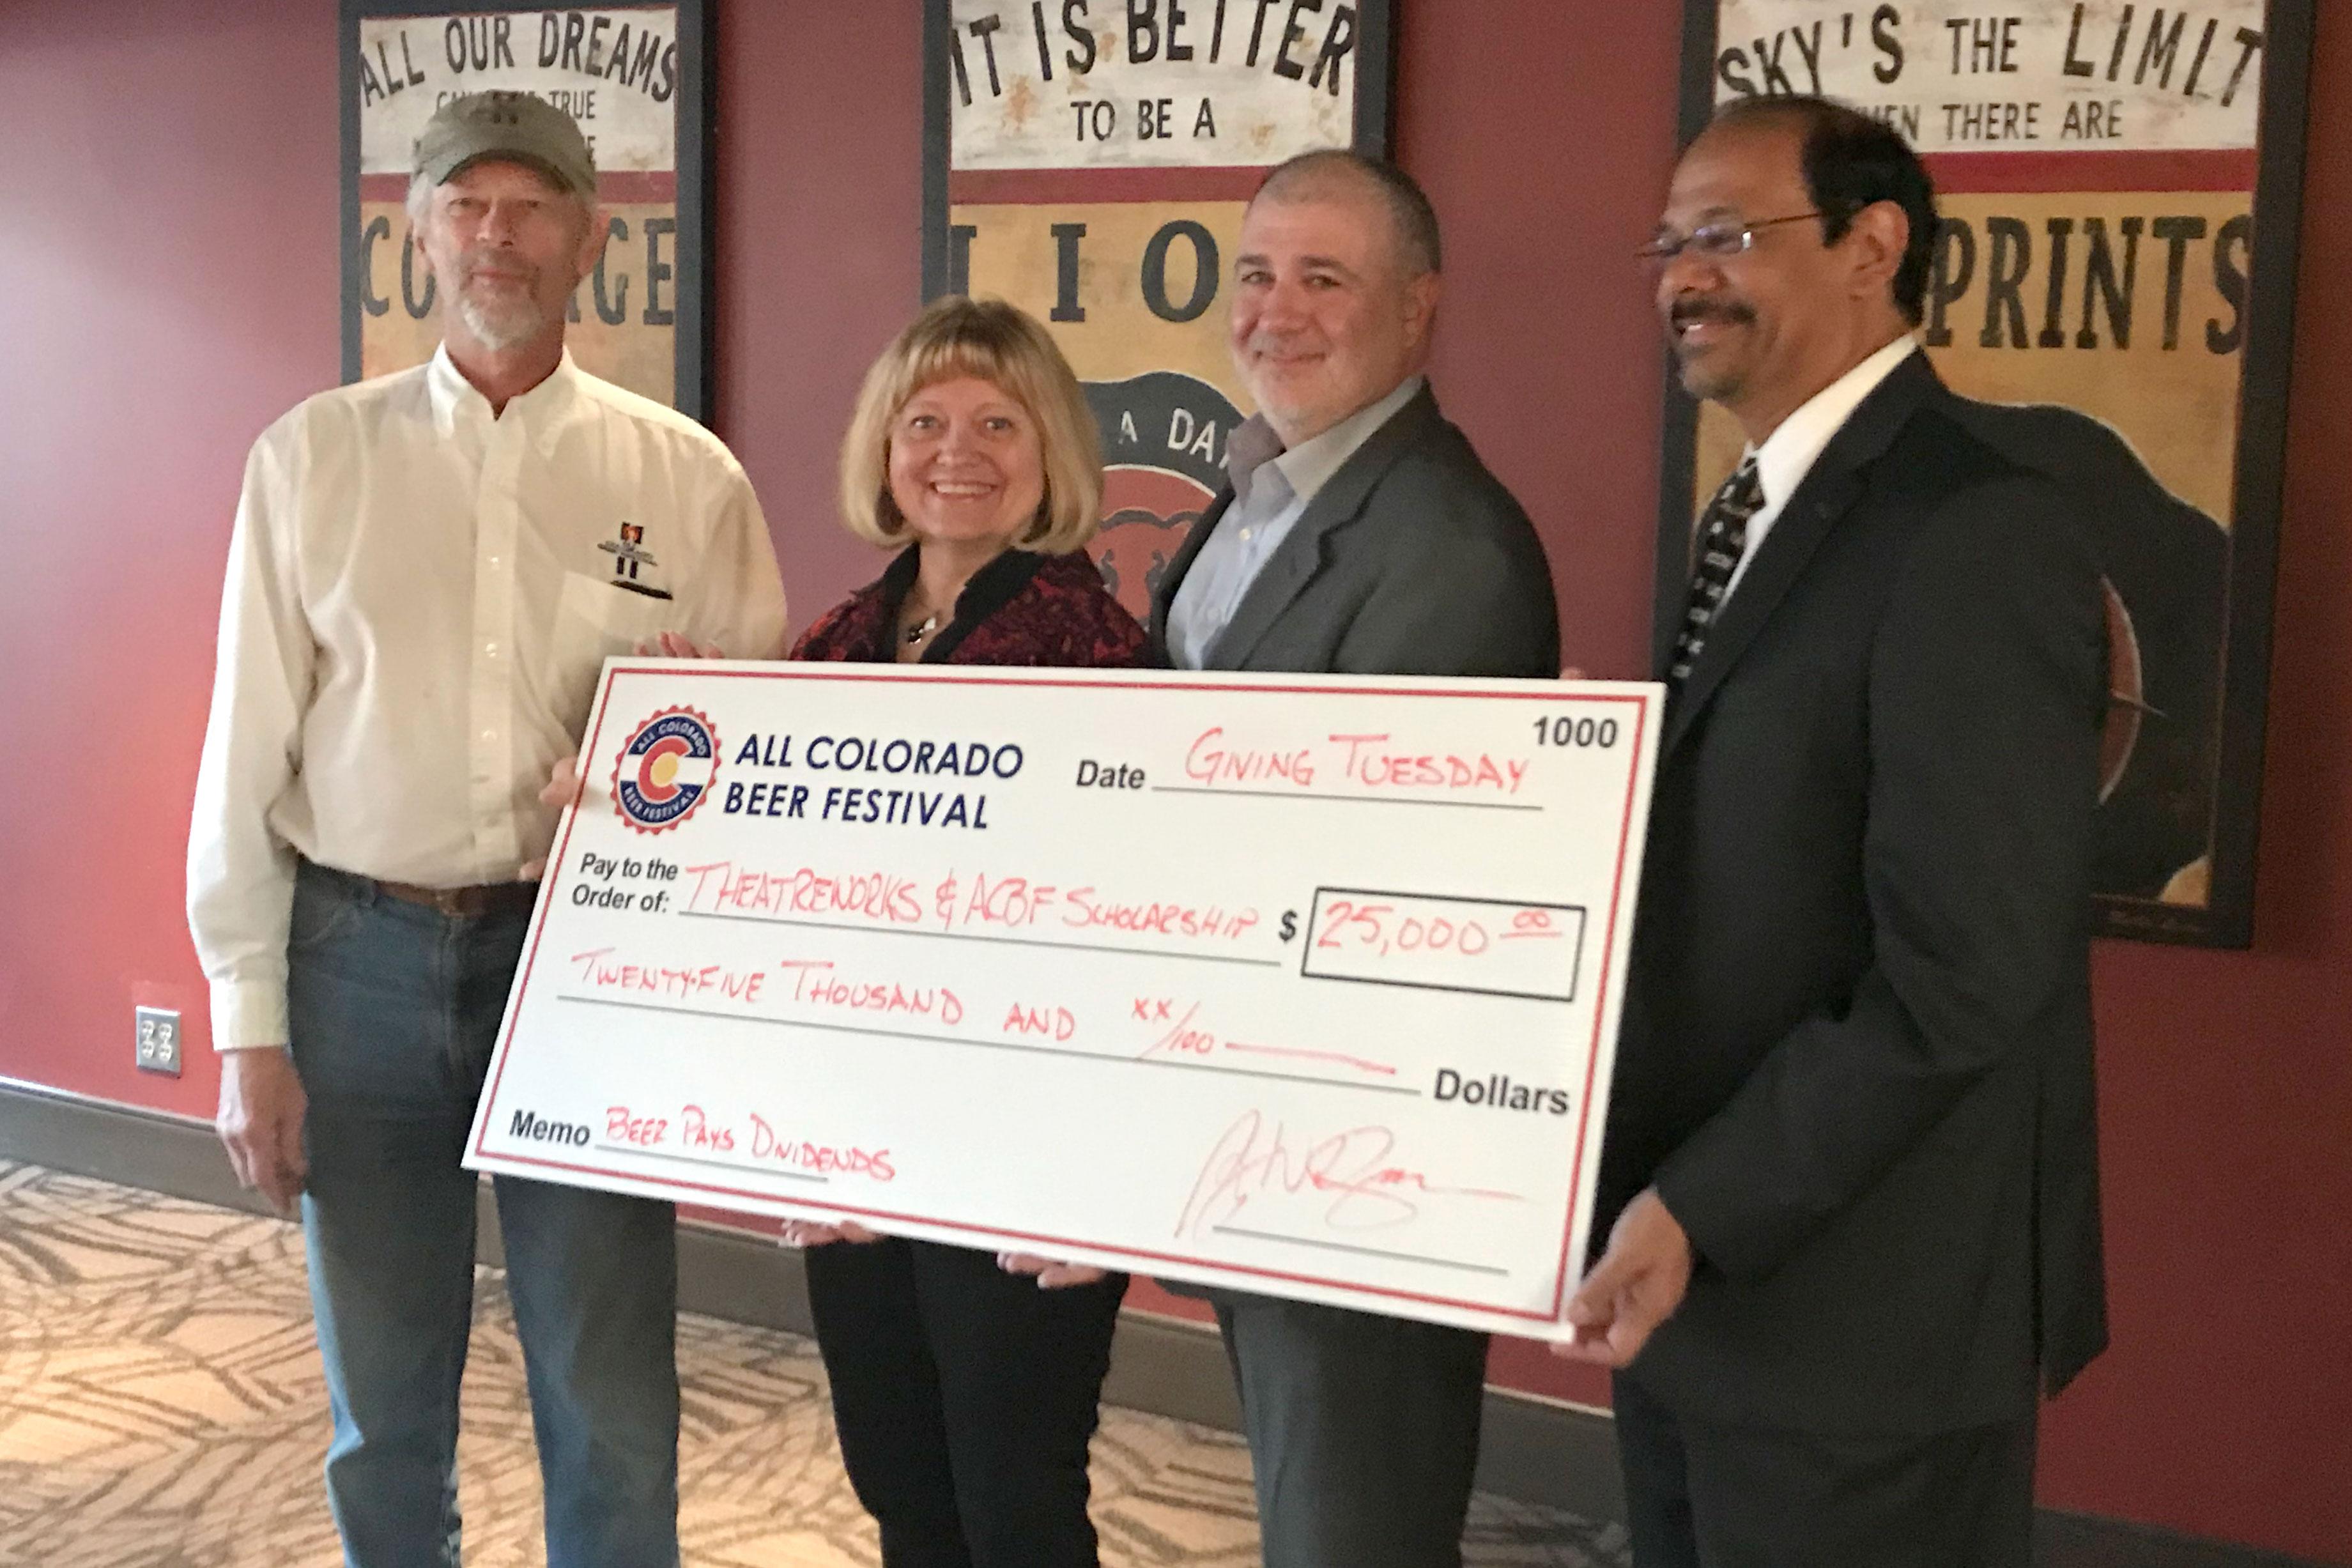 The All Colorado Beer Festival donates $25,000 to UCCS Theatreworks on Giving Tuesday